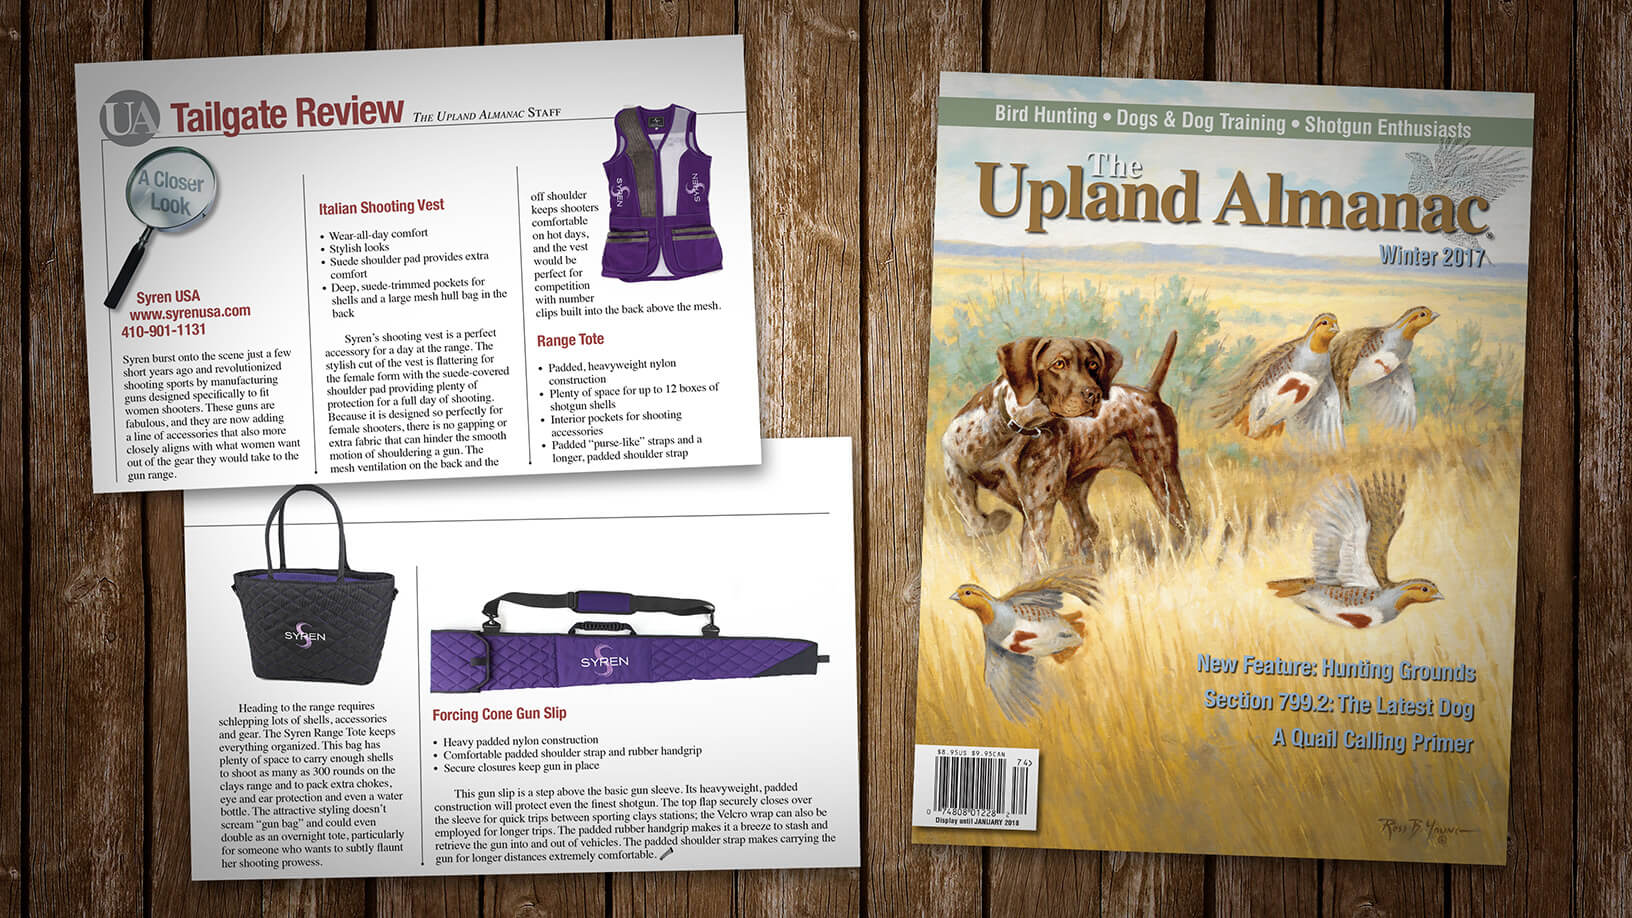 [Upland Almanac: Winter 2017] Tailgate Review: Syren Gear